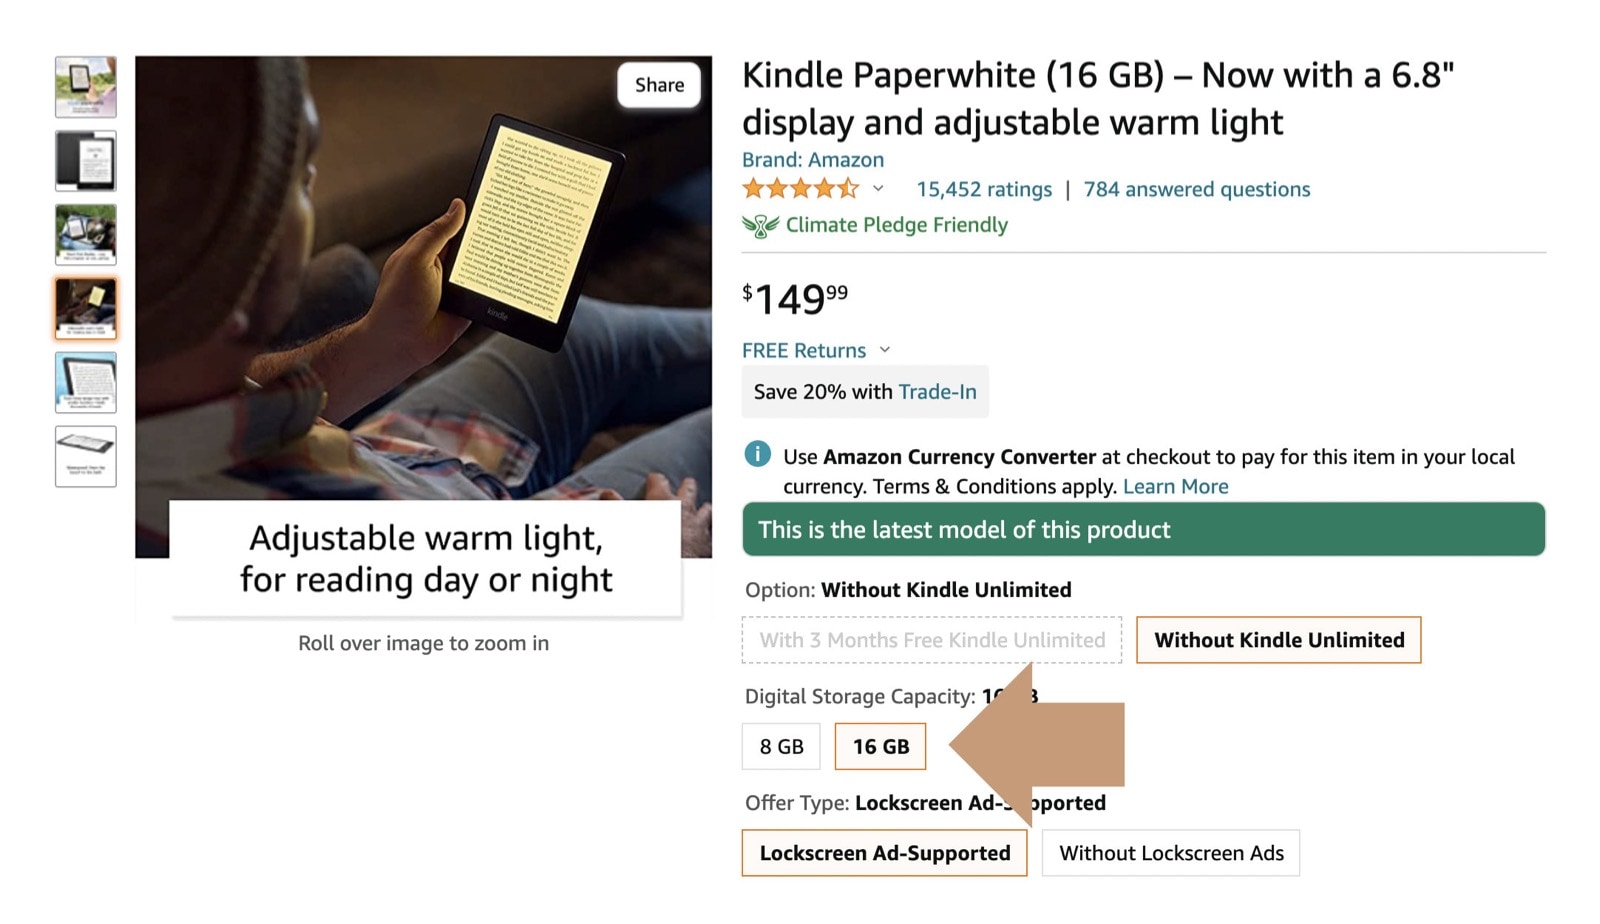 You can now buy Kindle Paperwhite with 16 GB storage